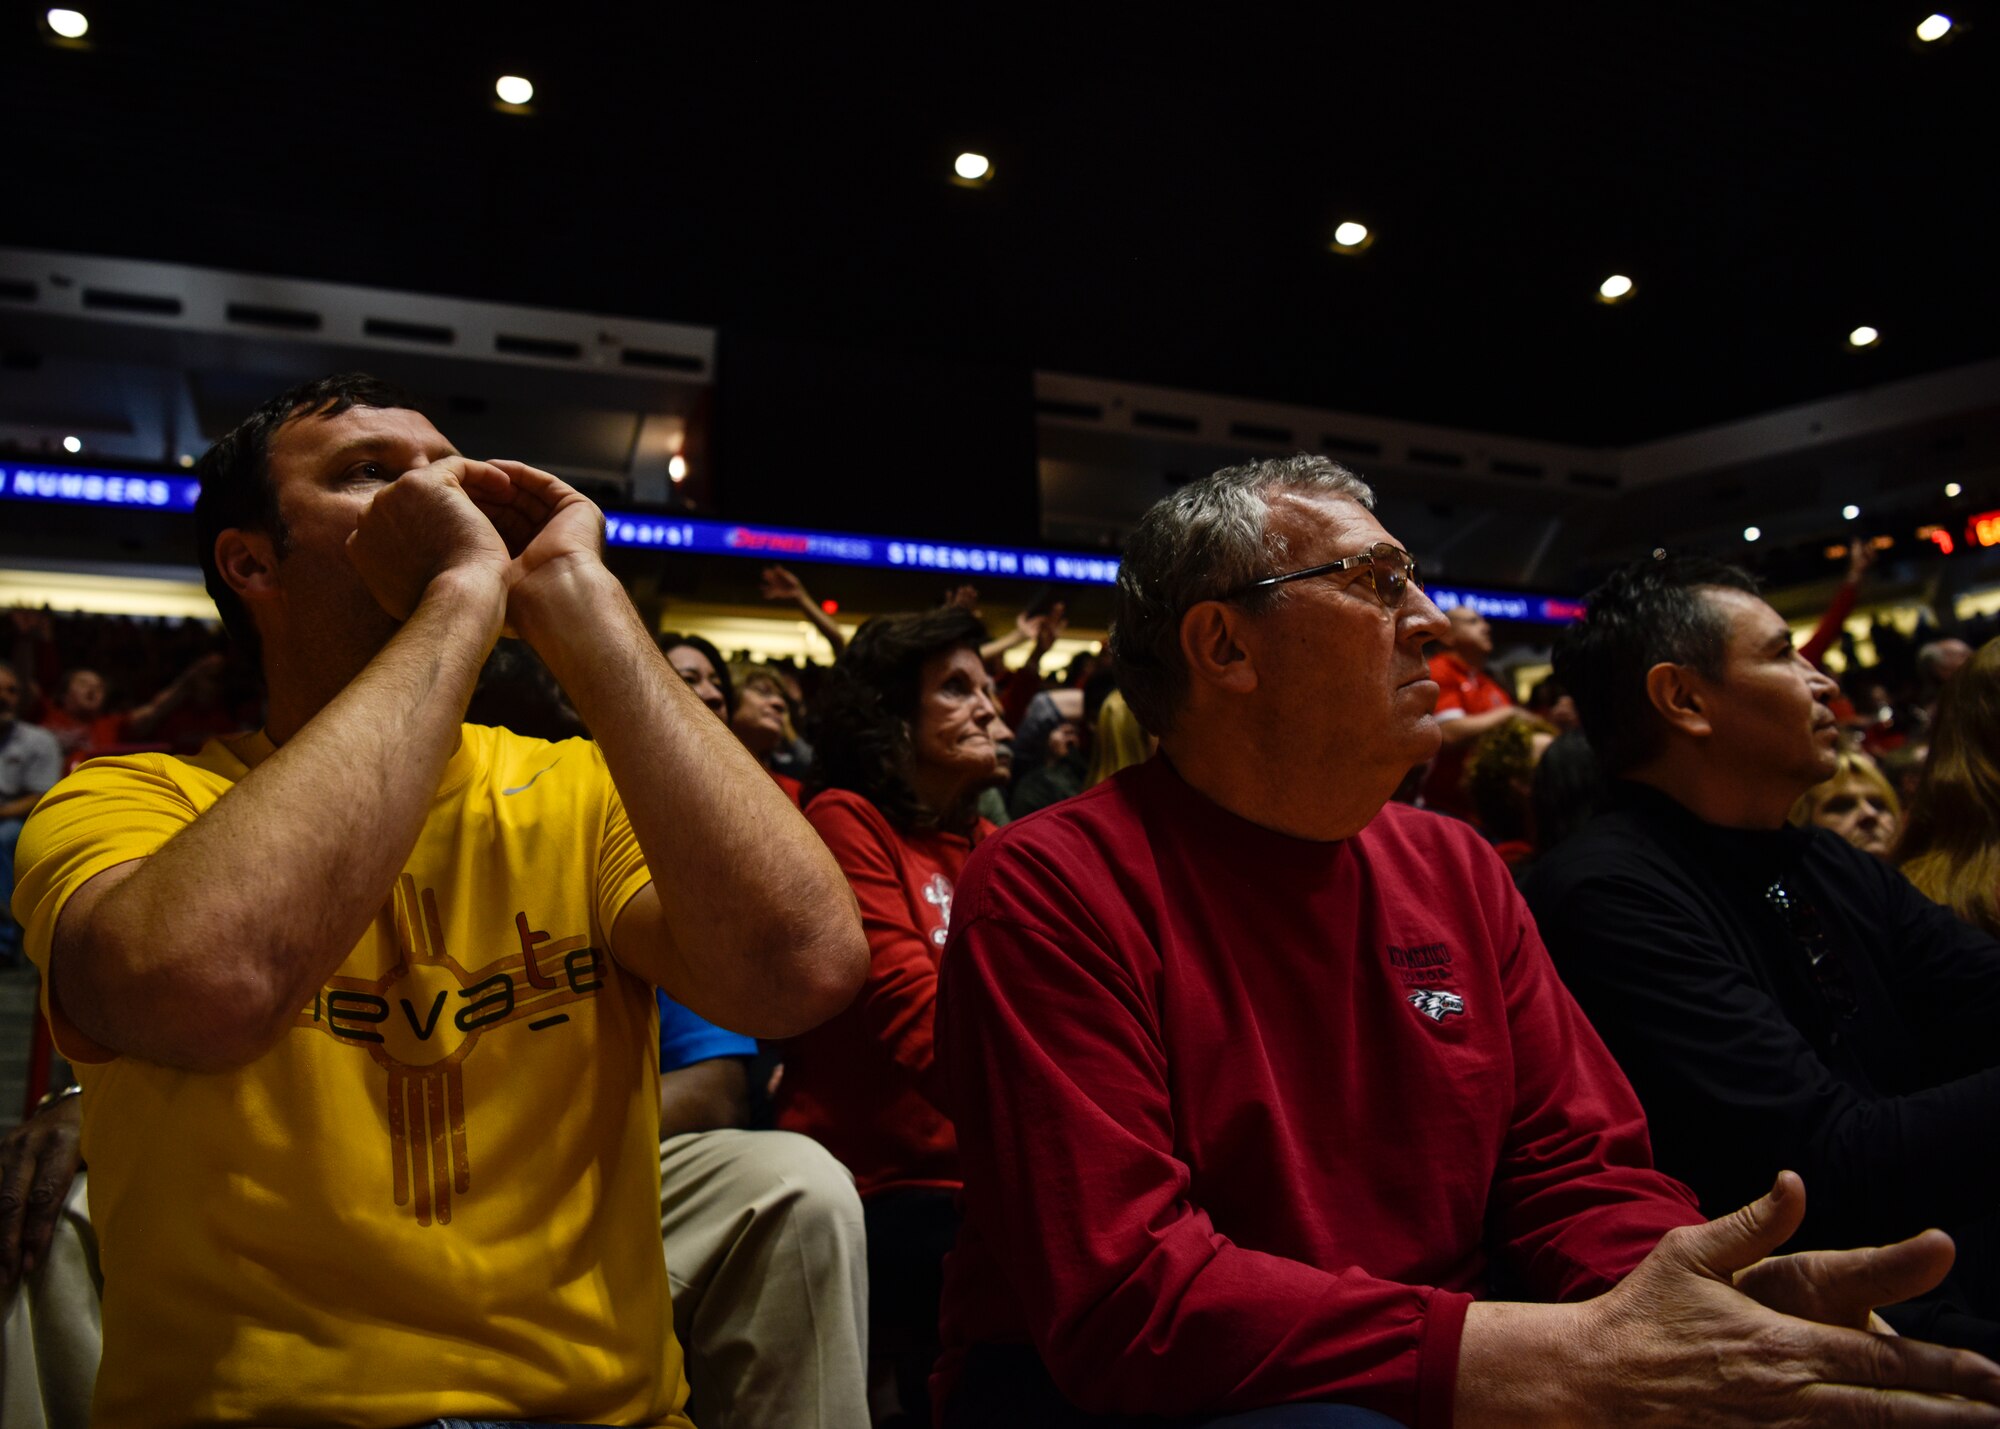 UNM fans at a basketball game.